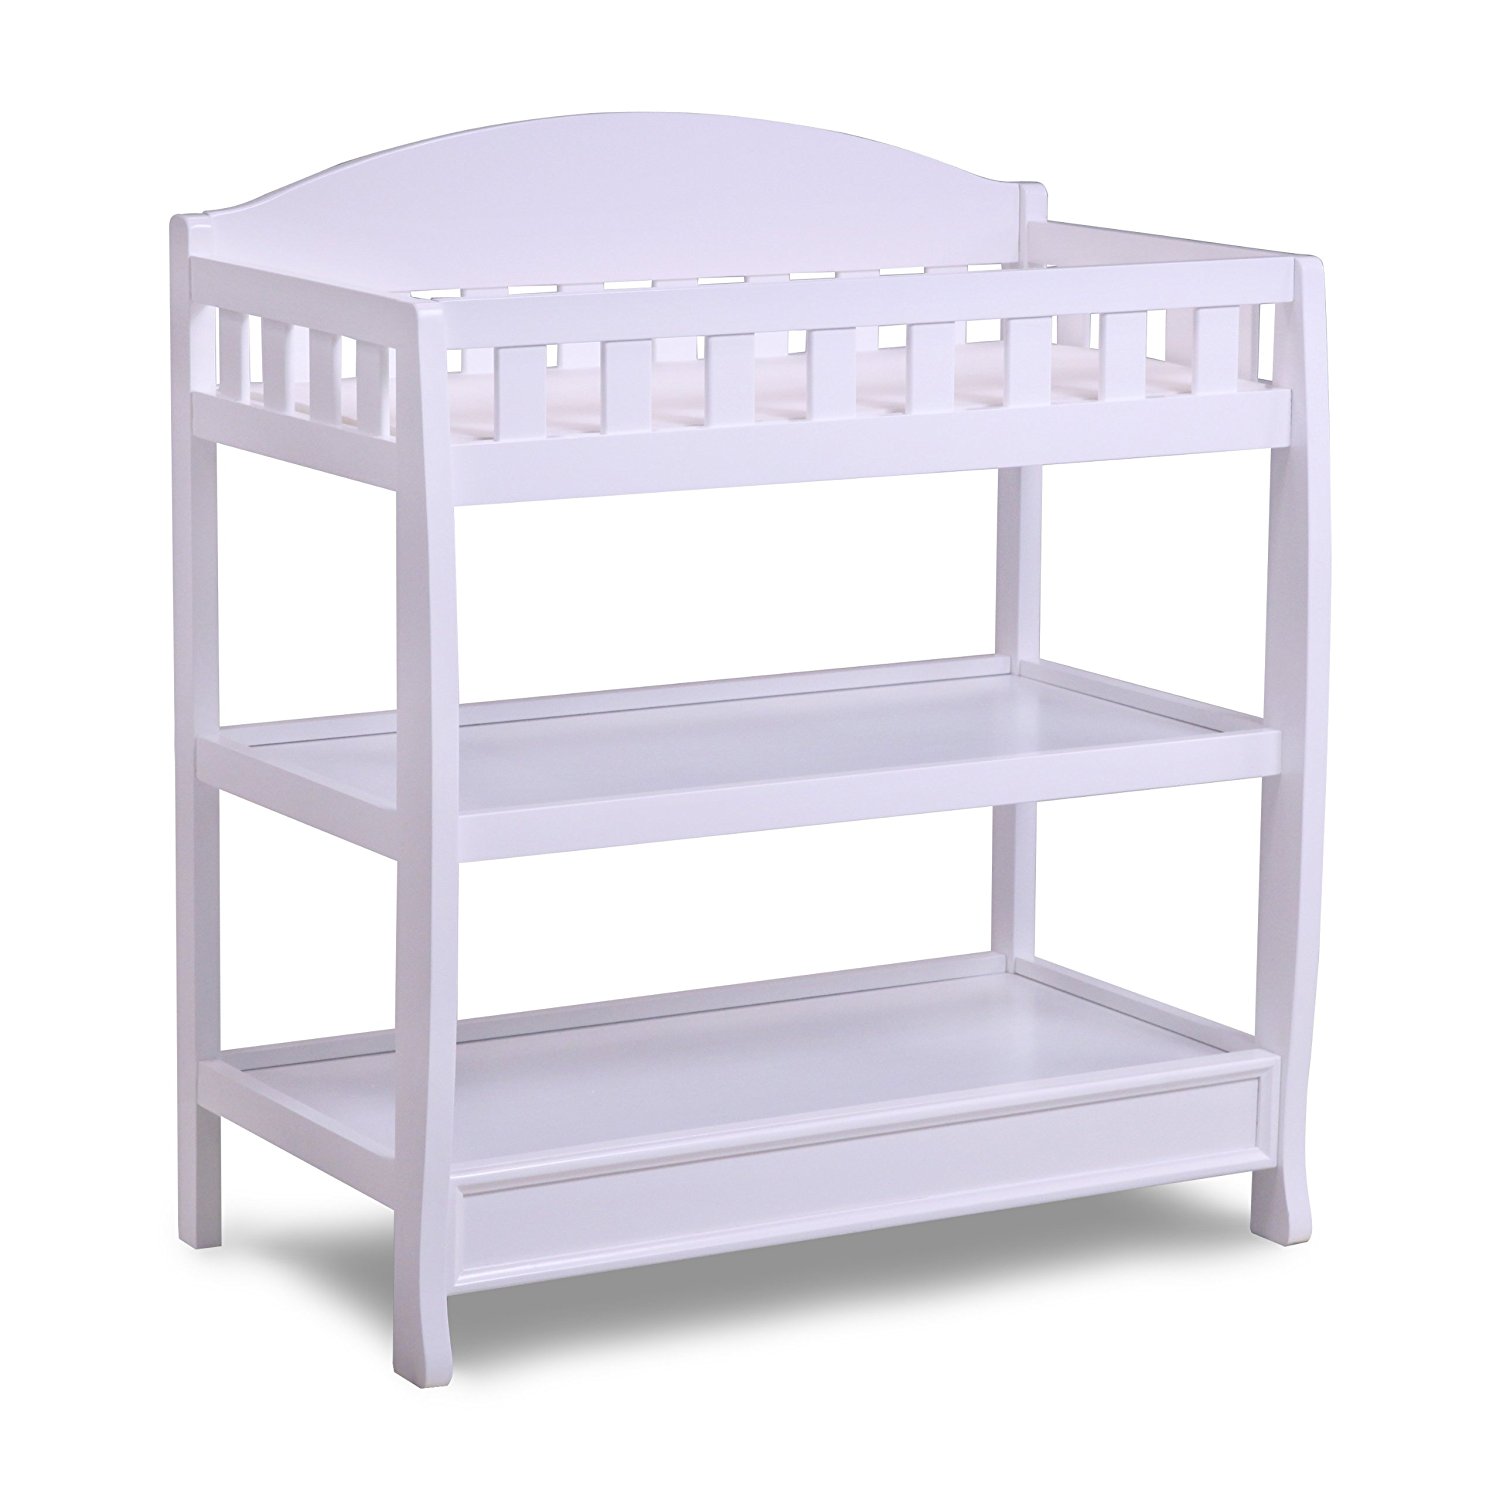 delta children infant changing table with pad, white HXXDLQR